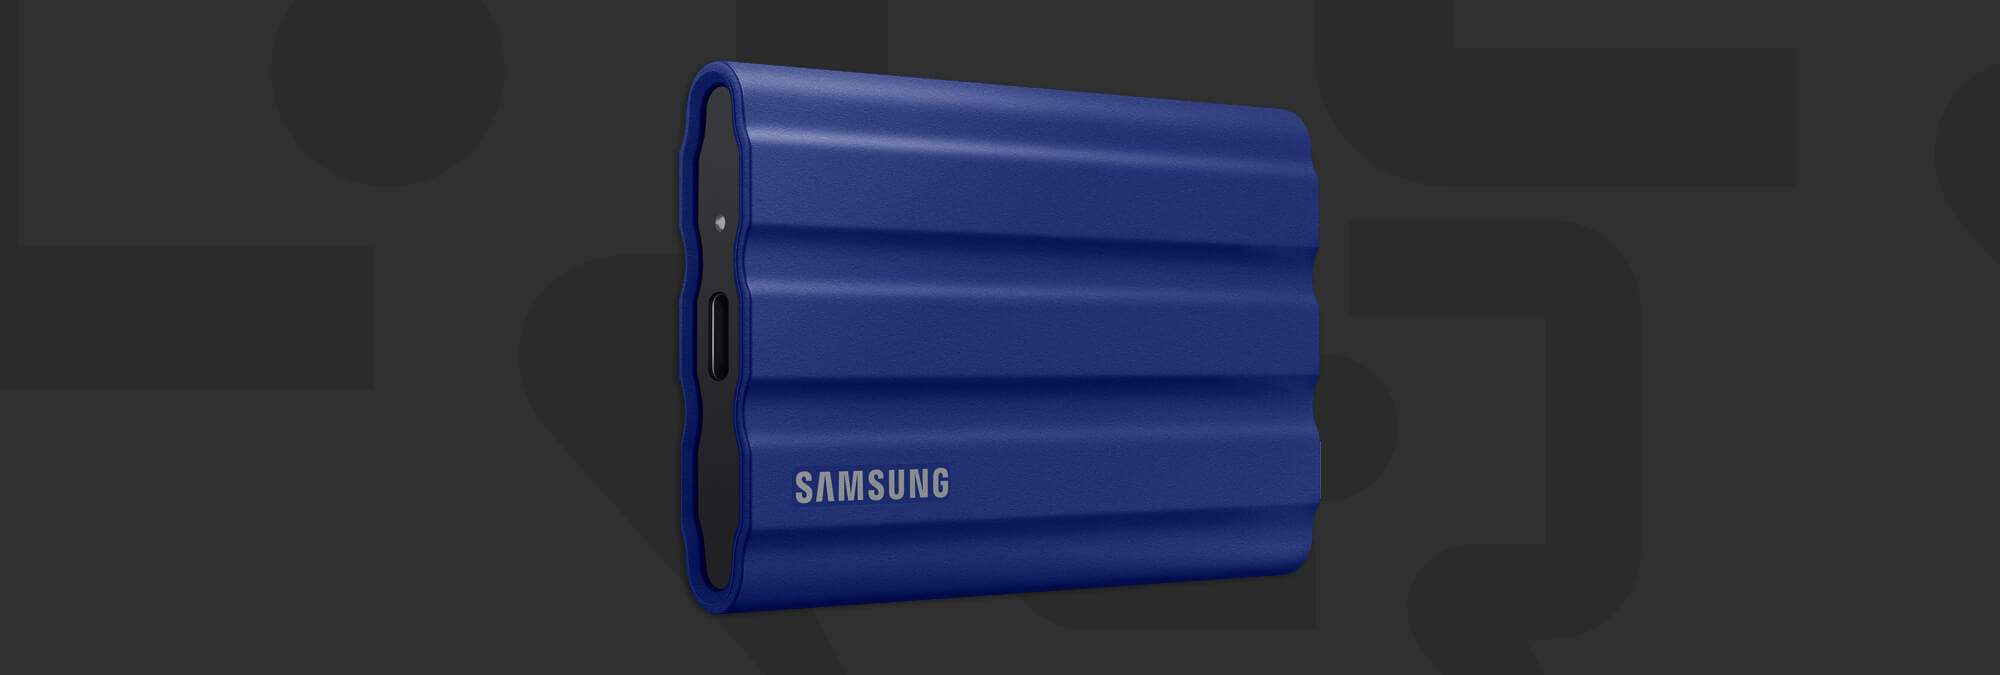 Samsung's Rugged and Portable T7 Shield SSD Is Now Just $60